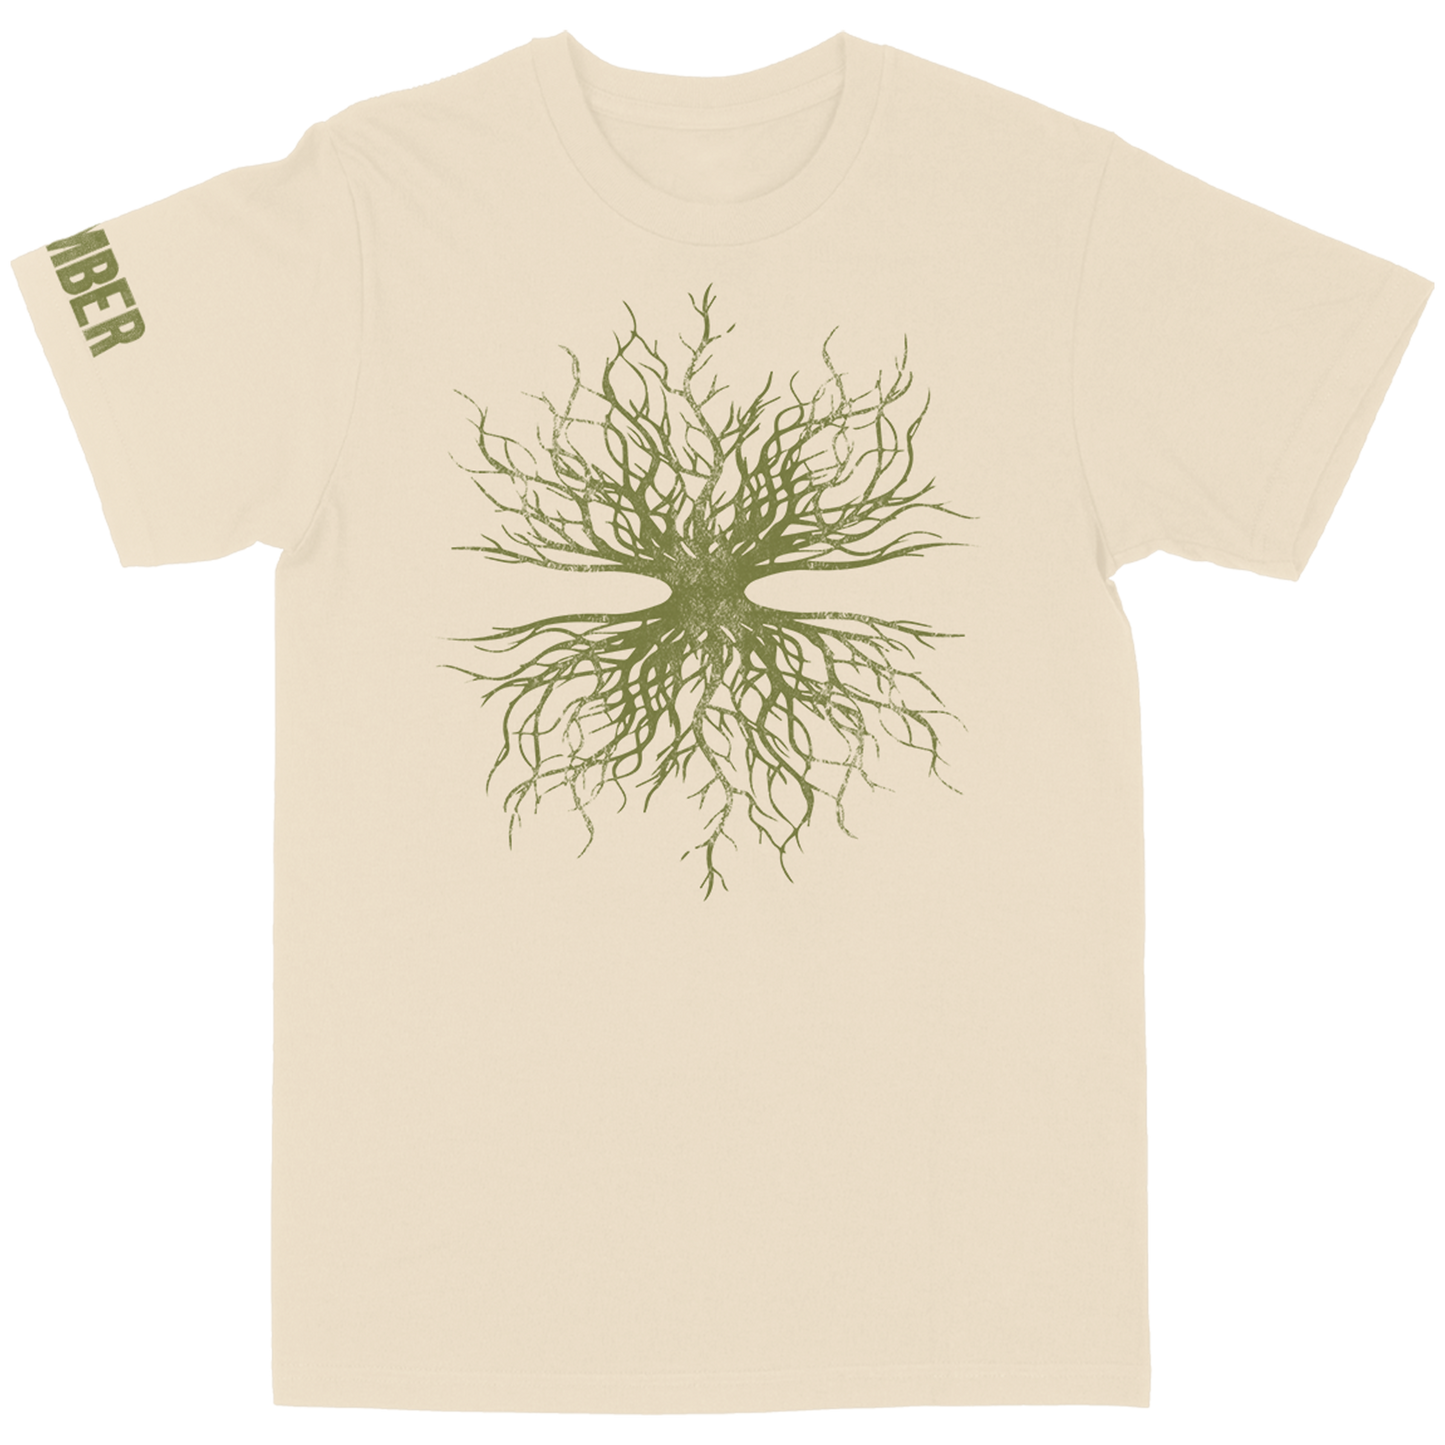 Swamp Family Roots Tee